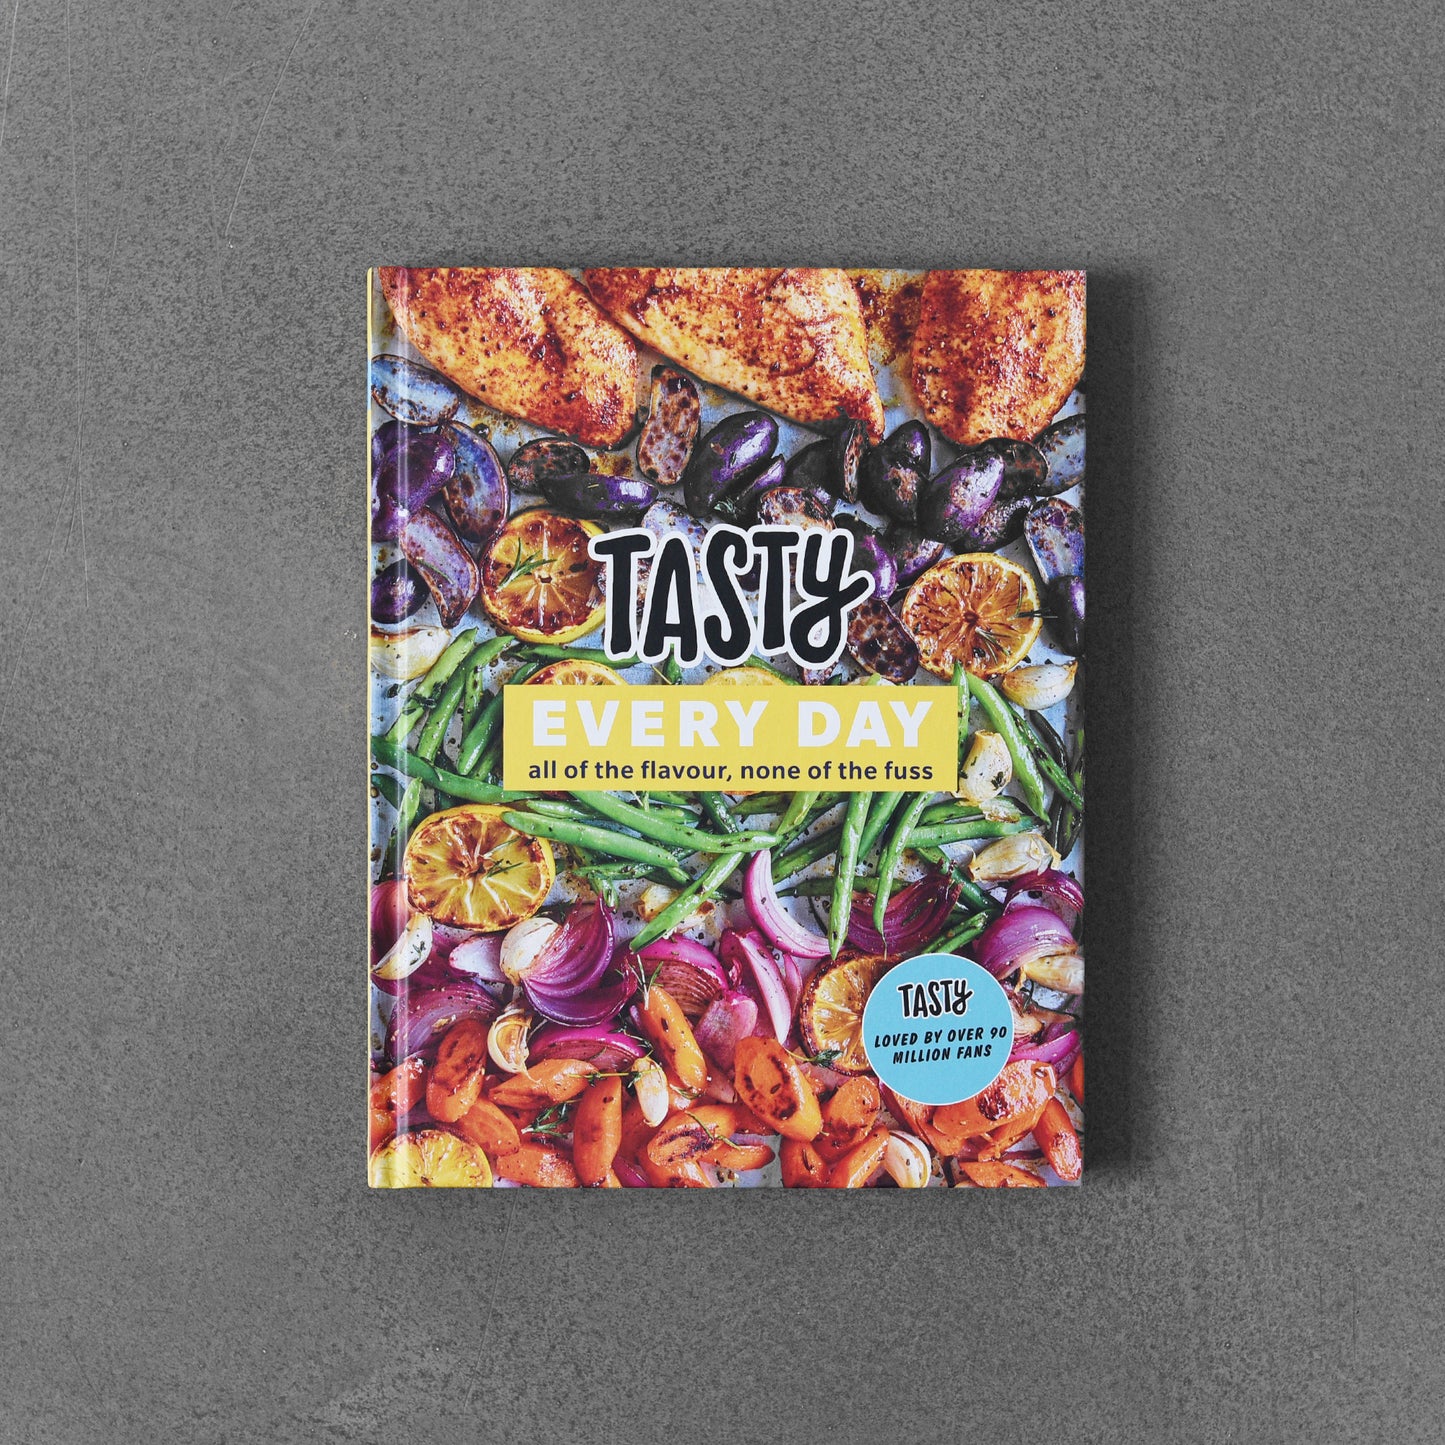 Tasty: Every Day All of the Flavour, None of the Fuss